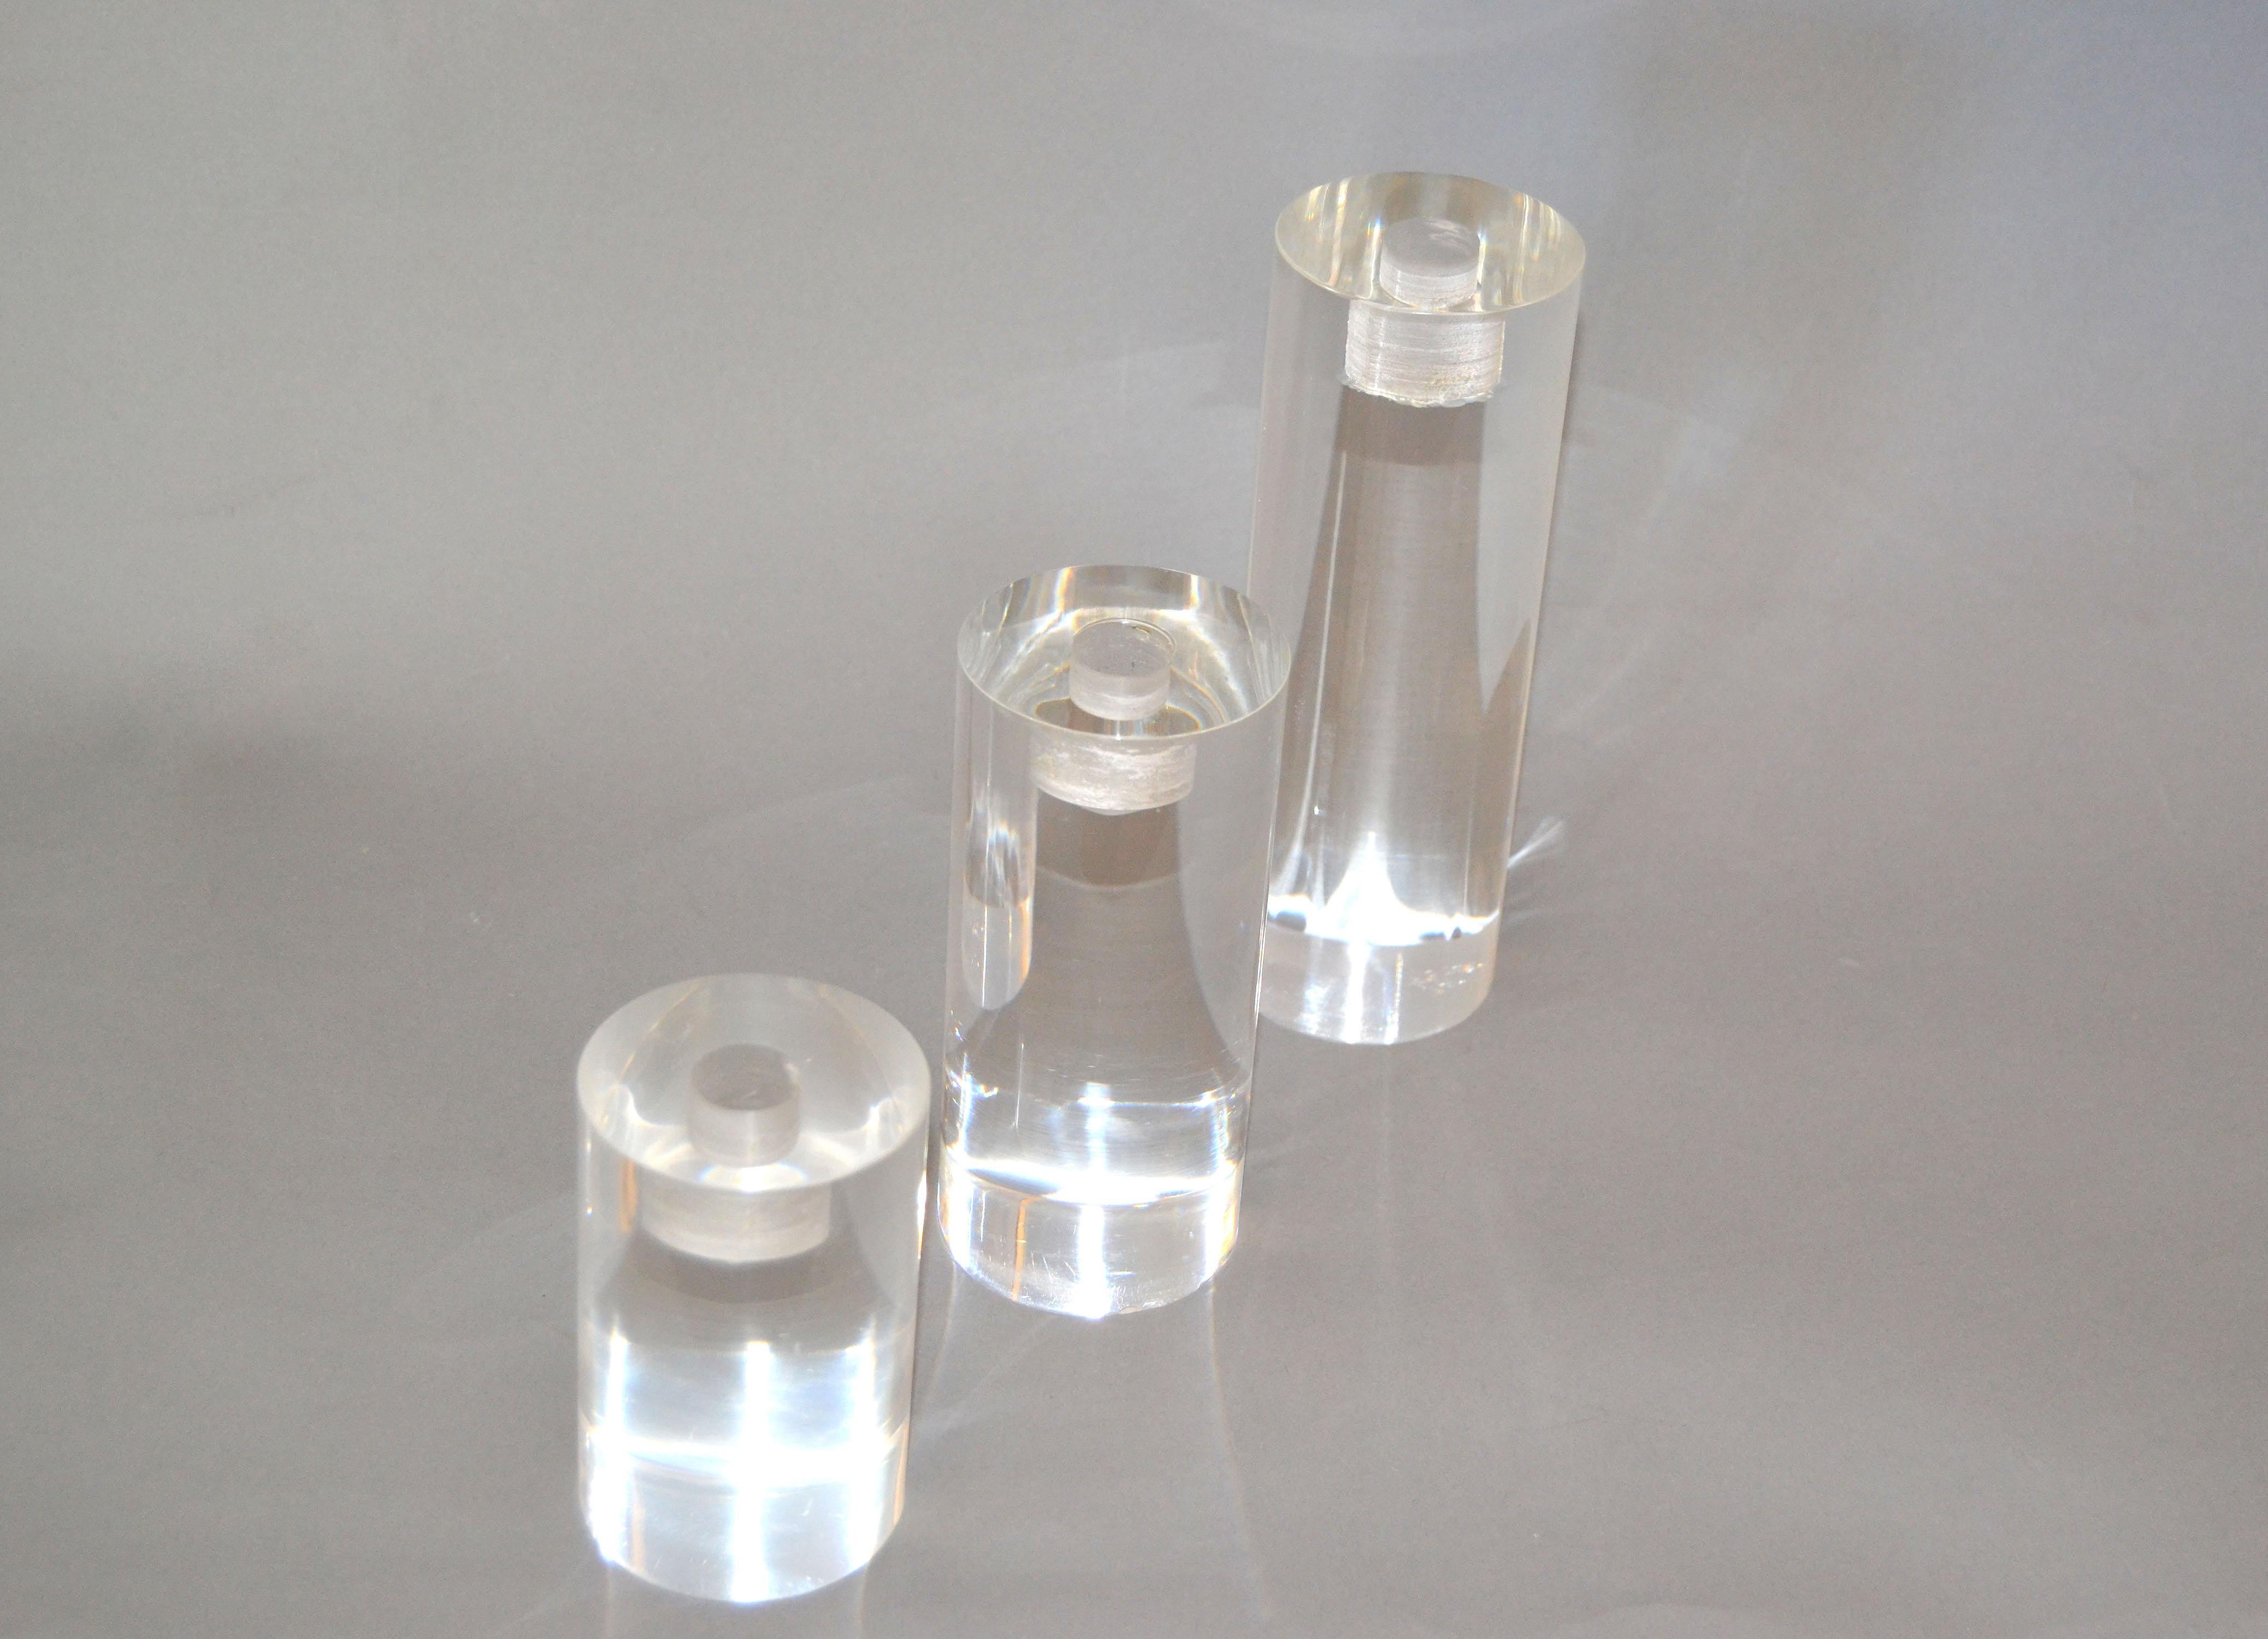 Nesting Set of 3 Mid-Century Modern Lucite Handmade Round Candleholders  In Good Condition For Sale In Miami, FL